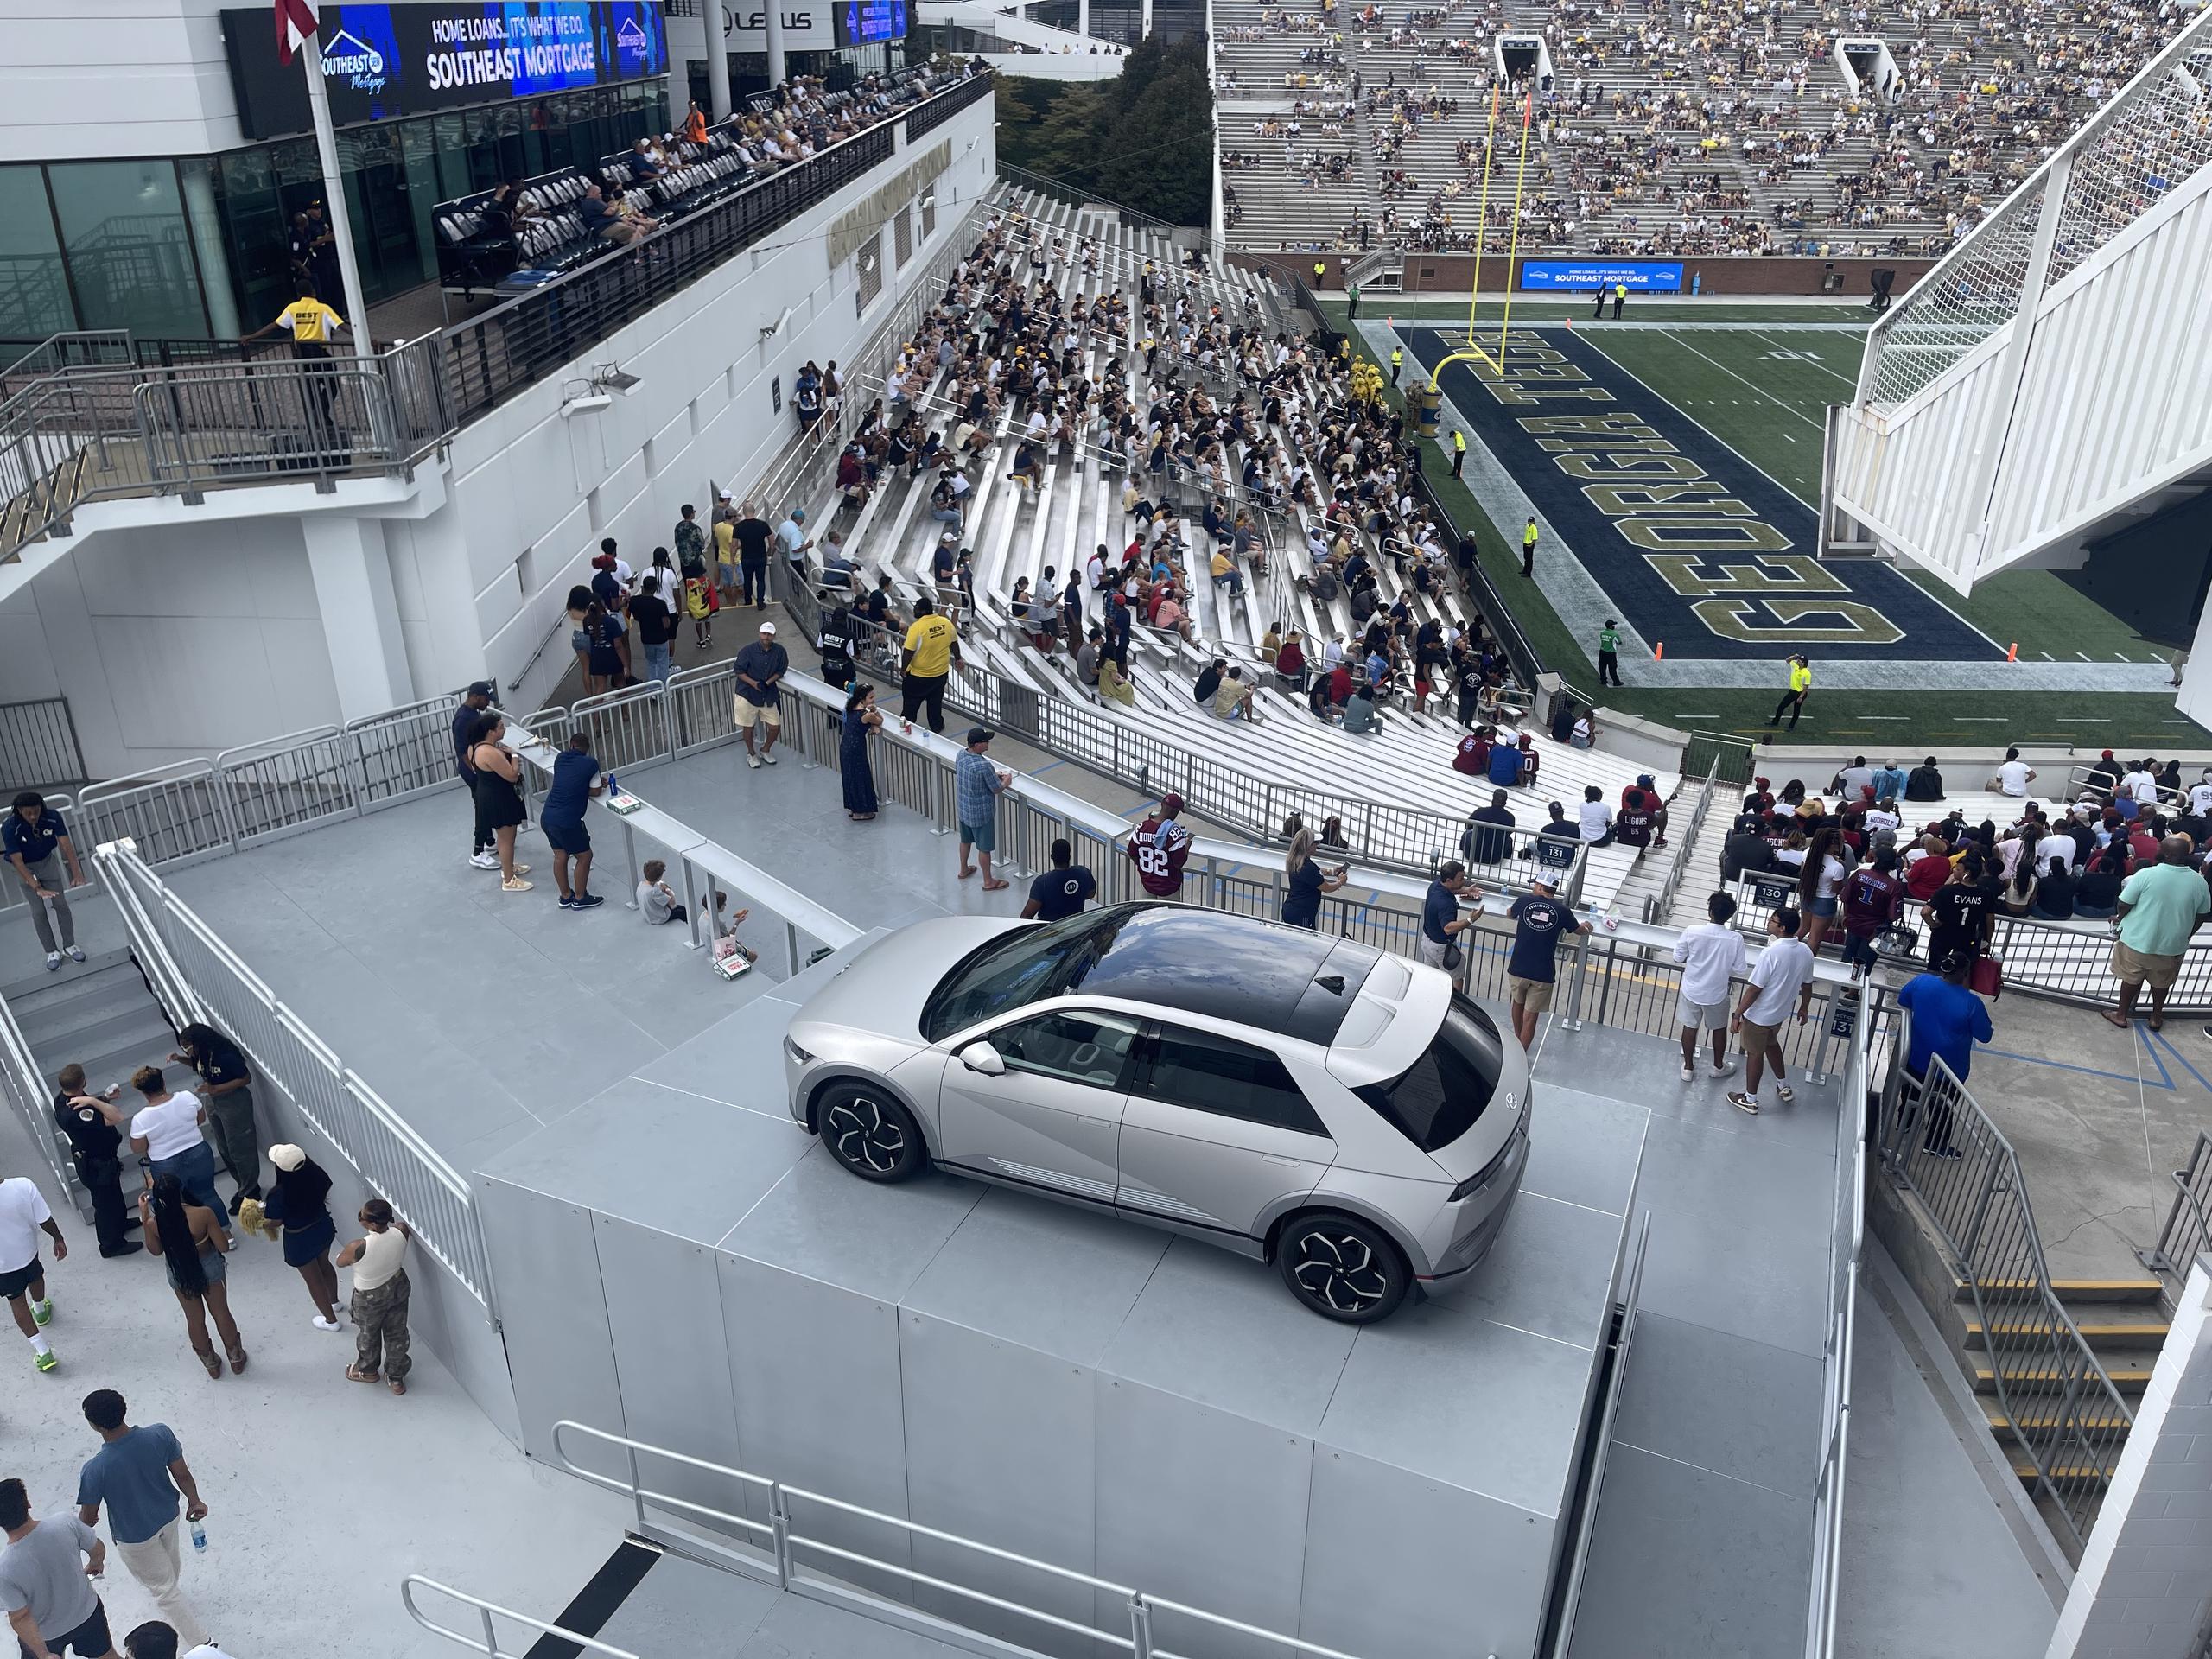 Bobby Dodd Stadium at Hyundai Field stage with railing that are supporting a car